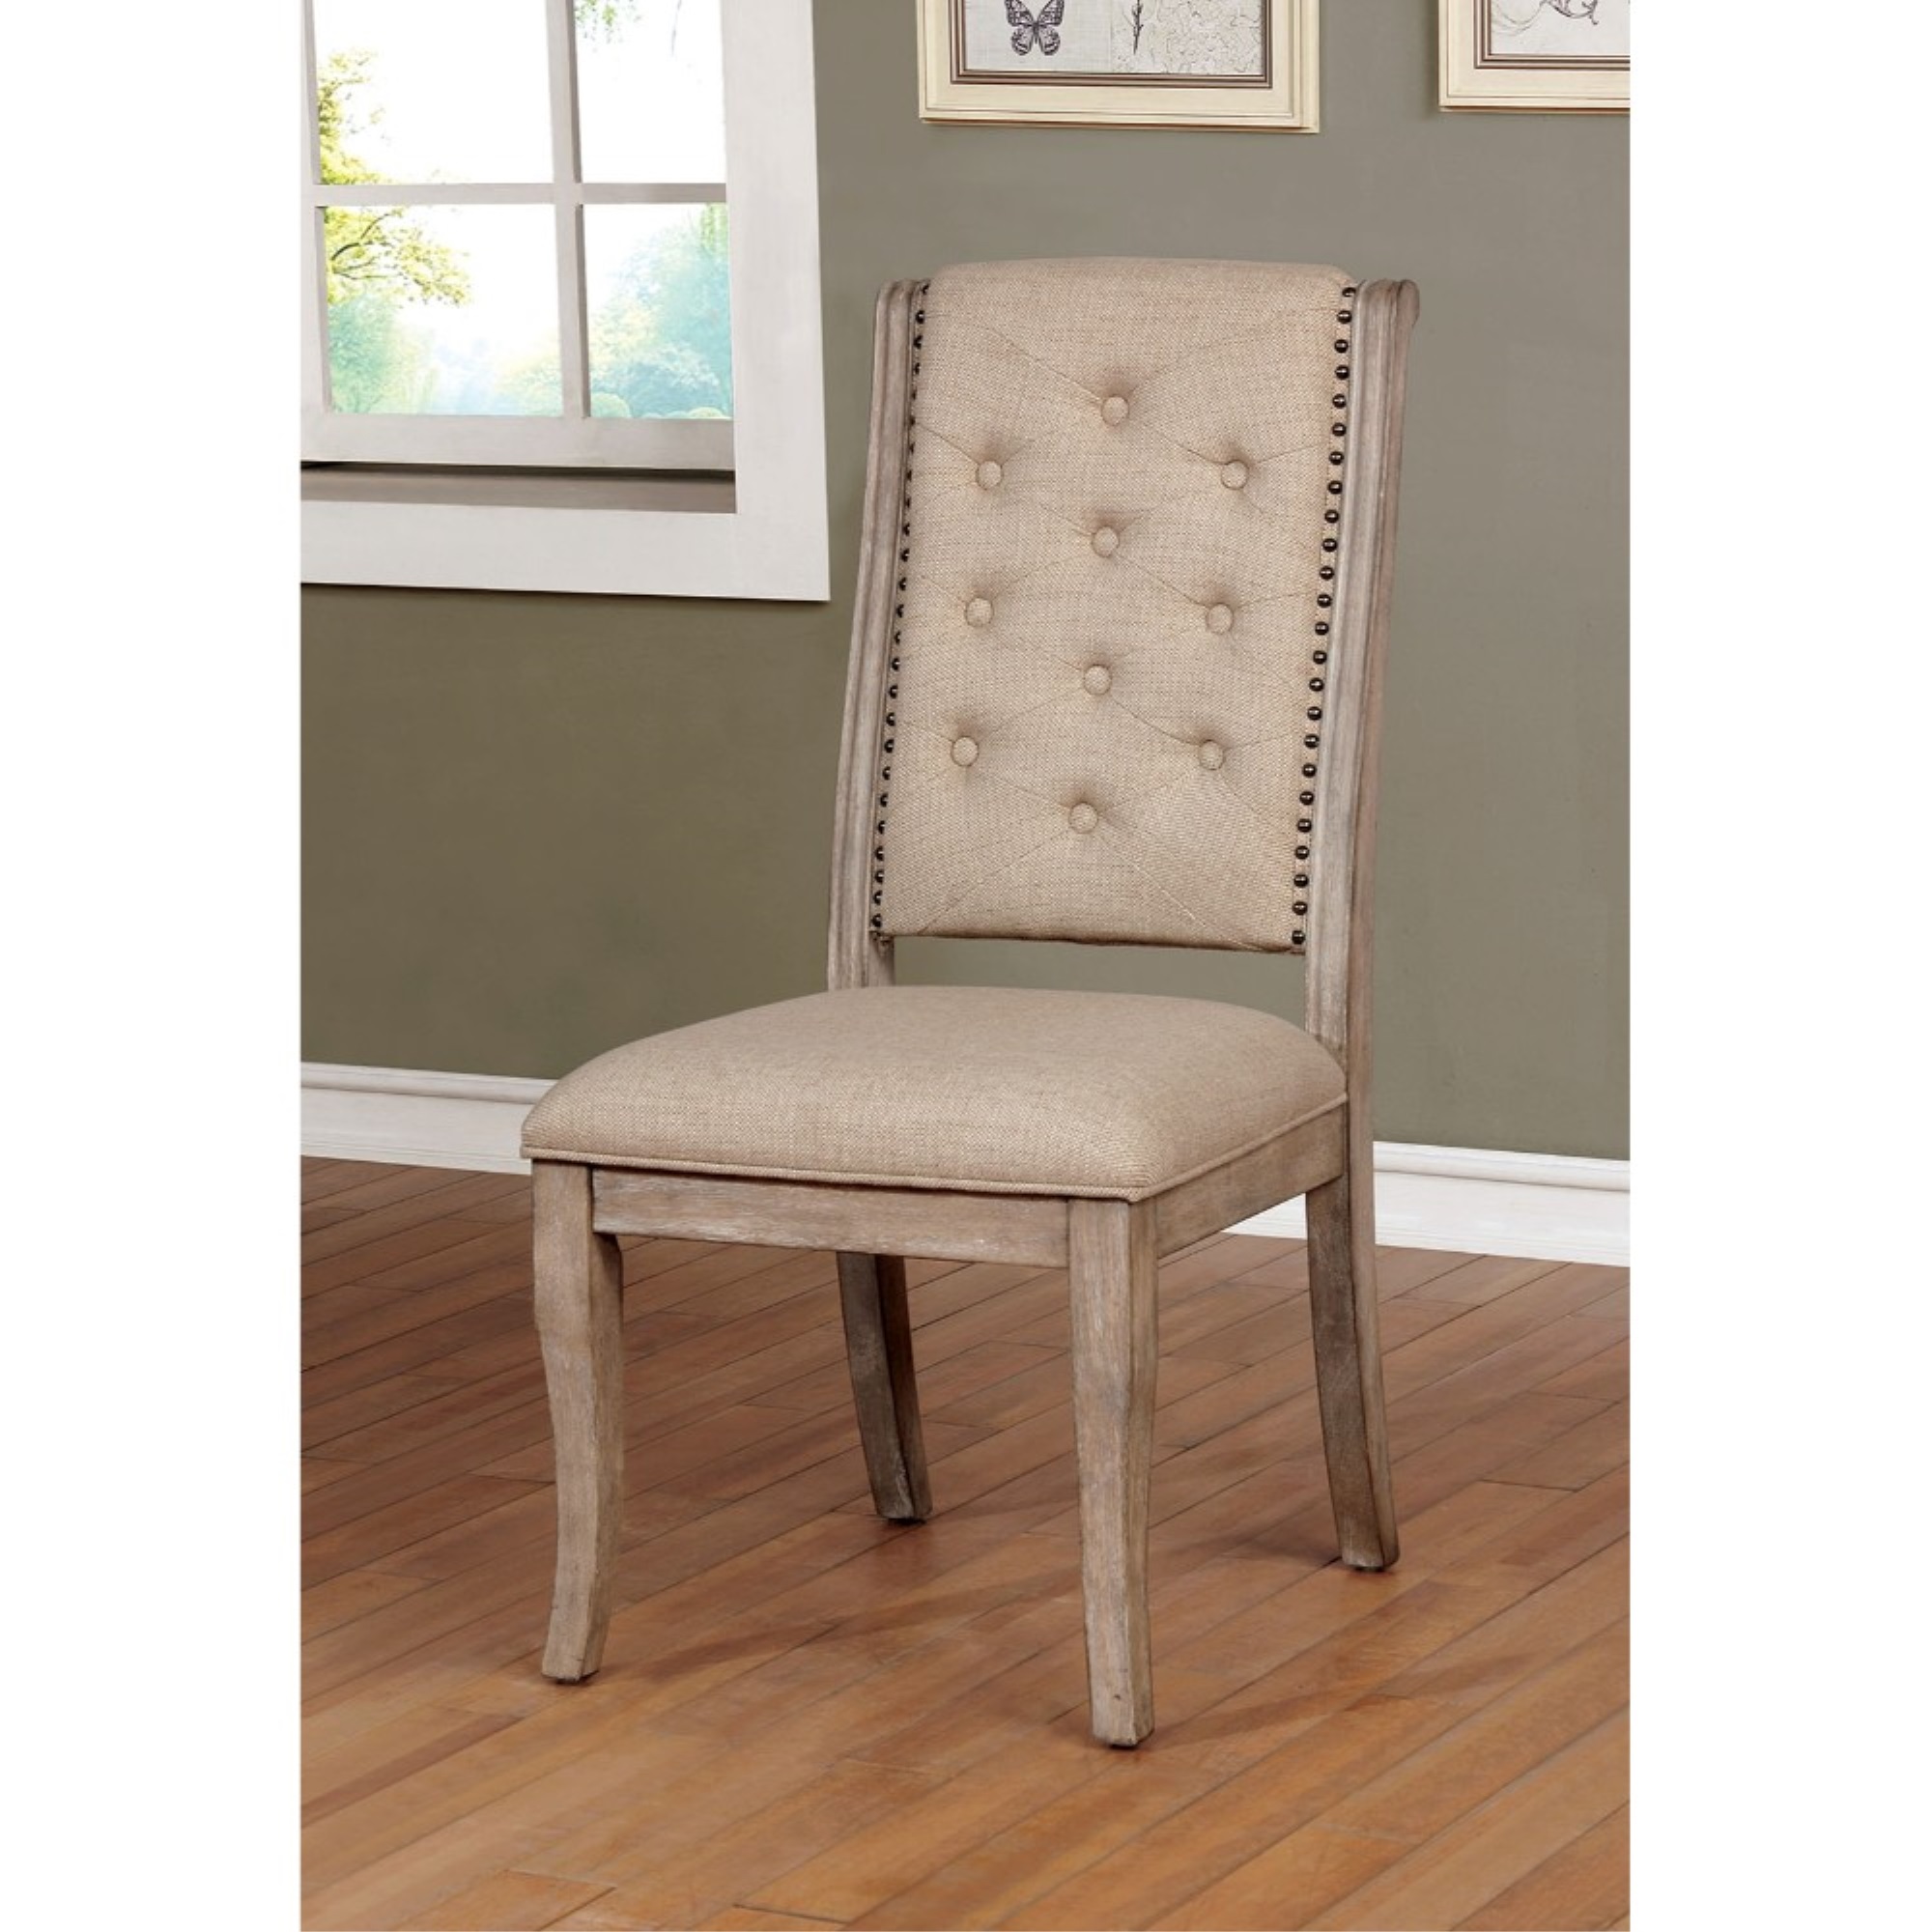 Benzara Fabric Upholstered Wooden Side Chair with Button Tufted Back, Pack Of 2, Beige and Brown